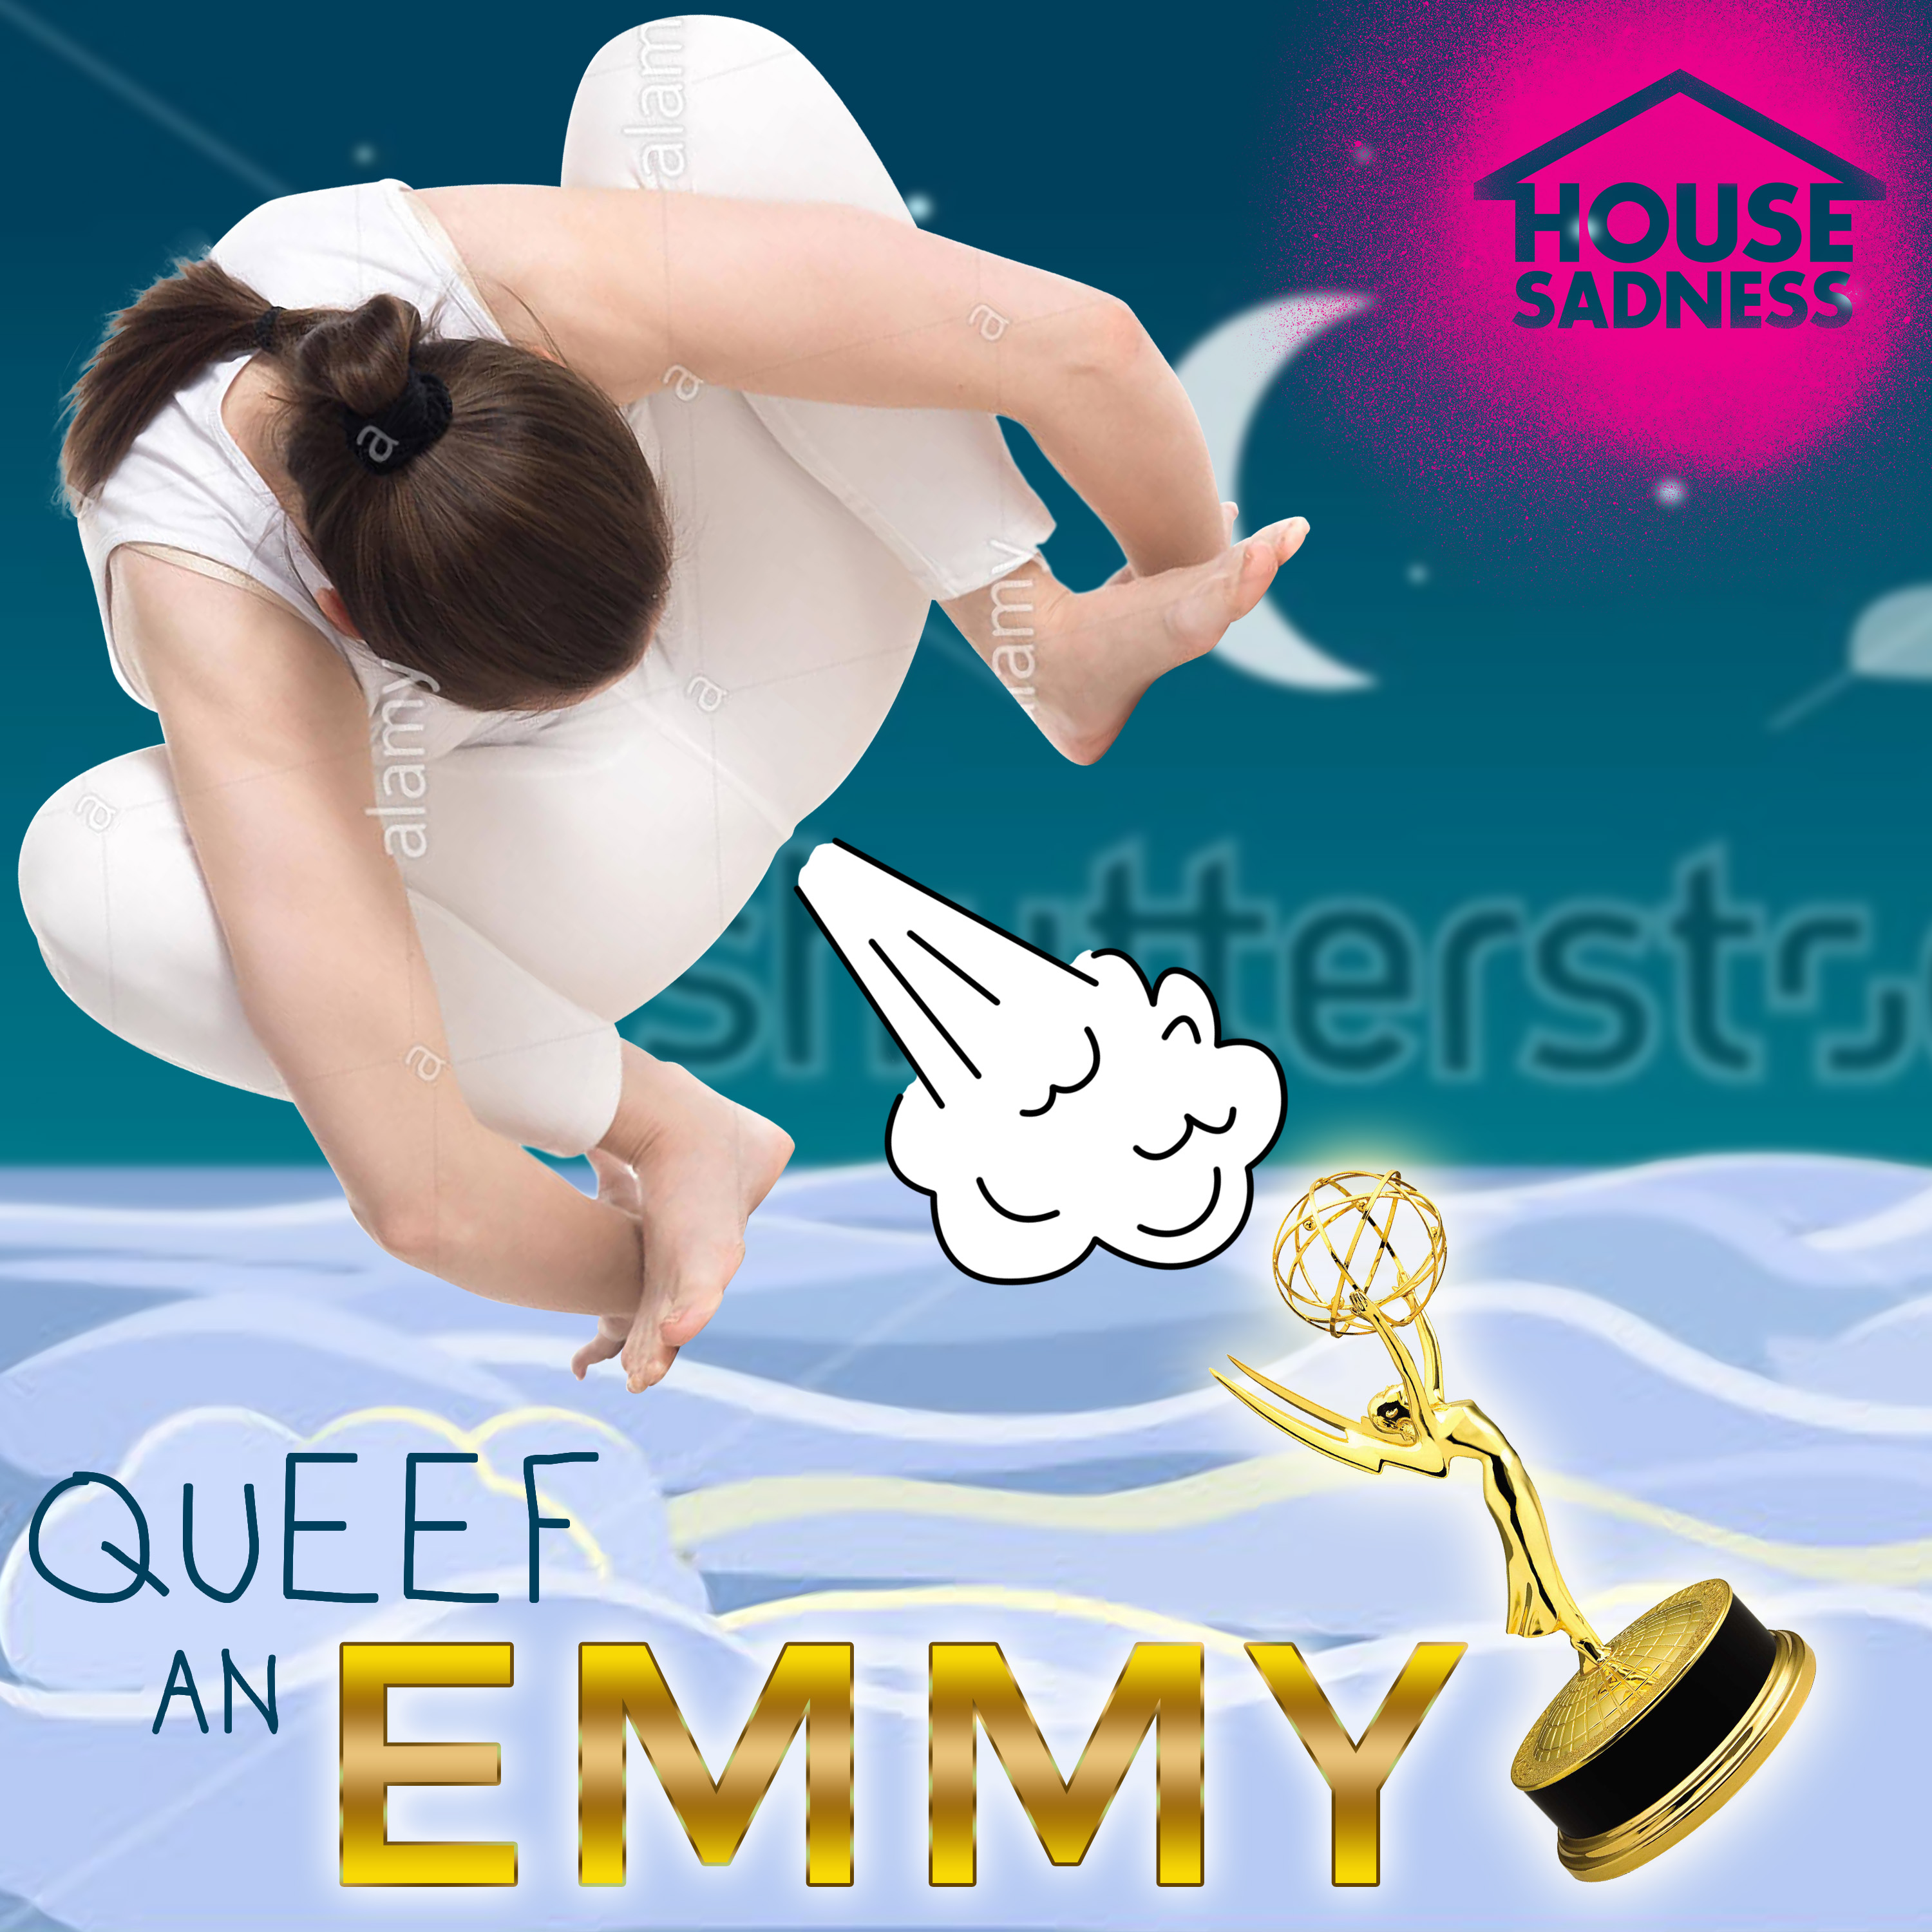 Queef an emmy.